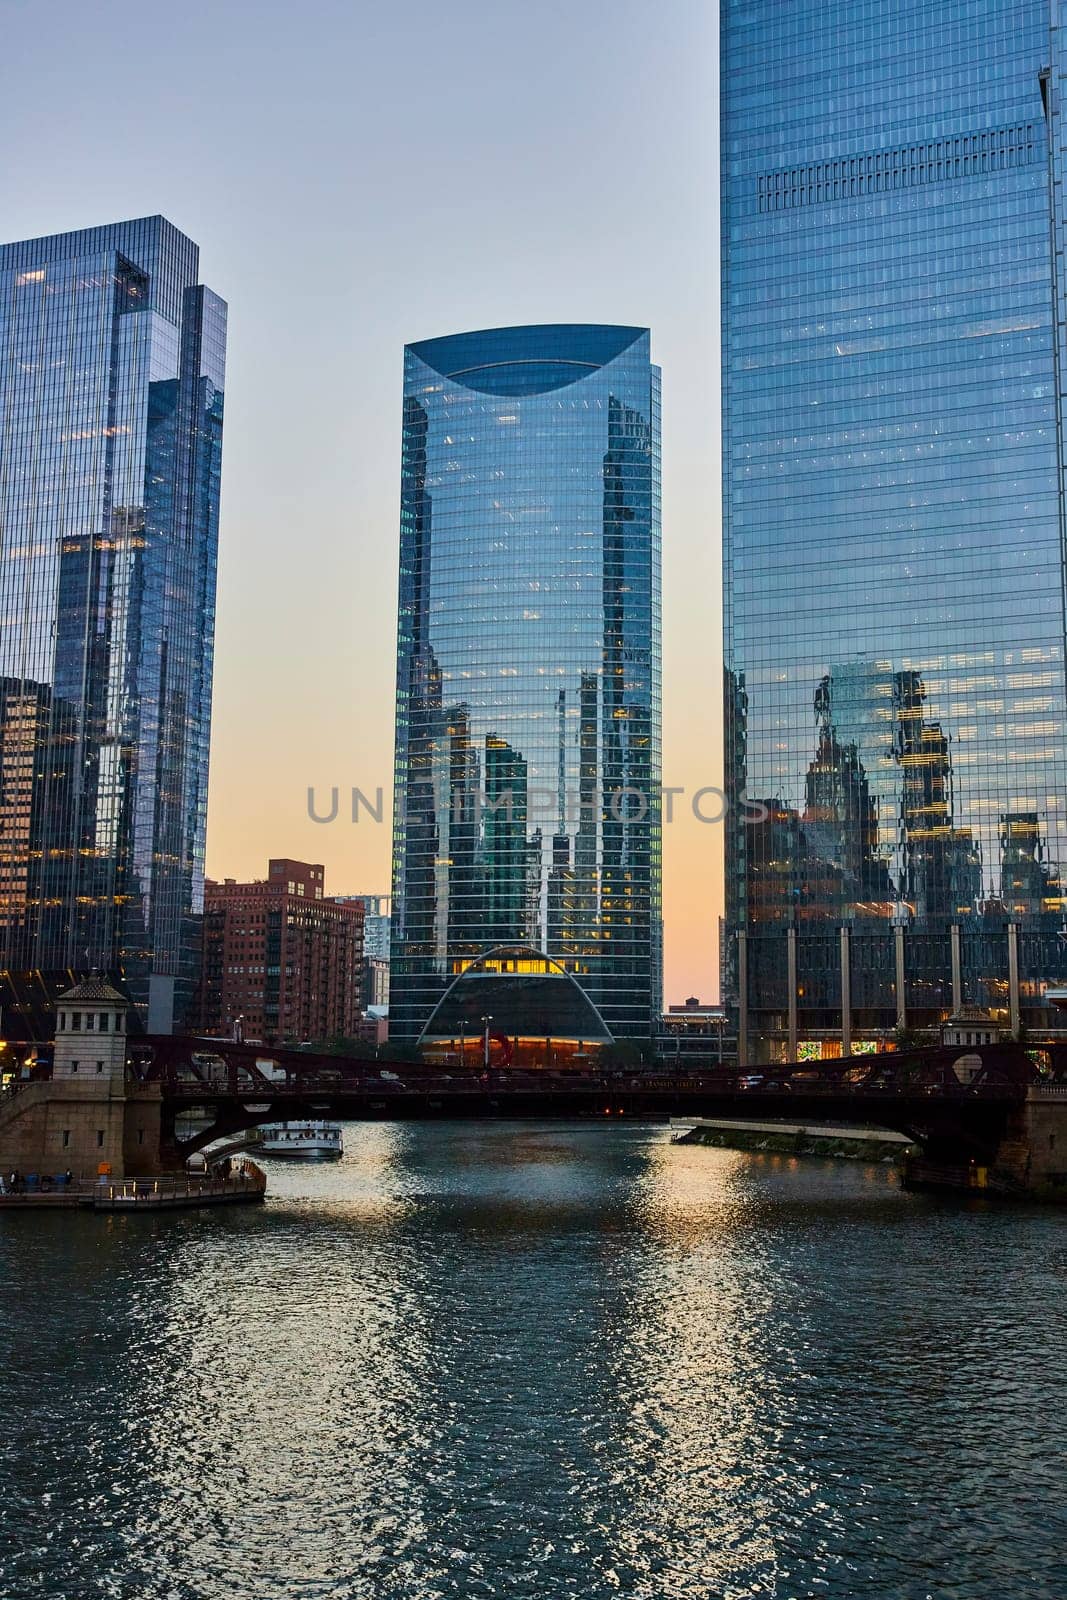 Chicago canal at dawn with light reflecting blue off skyscraper windows and waterway, tourism USA by njproductions